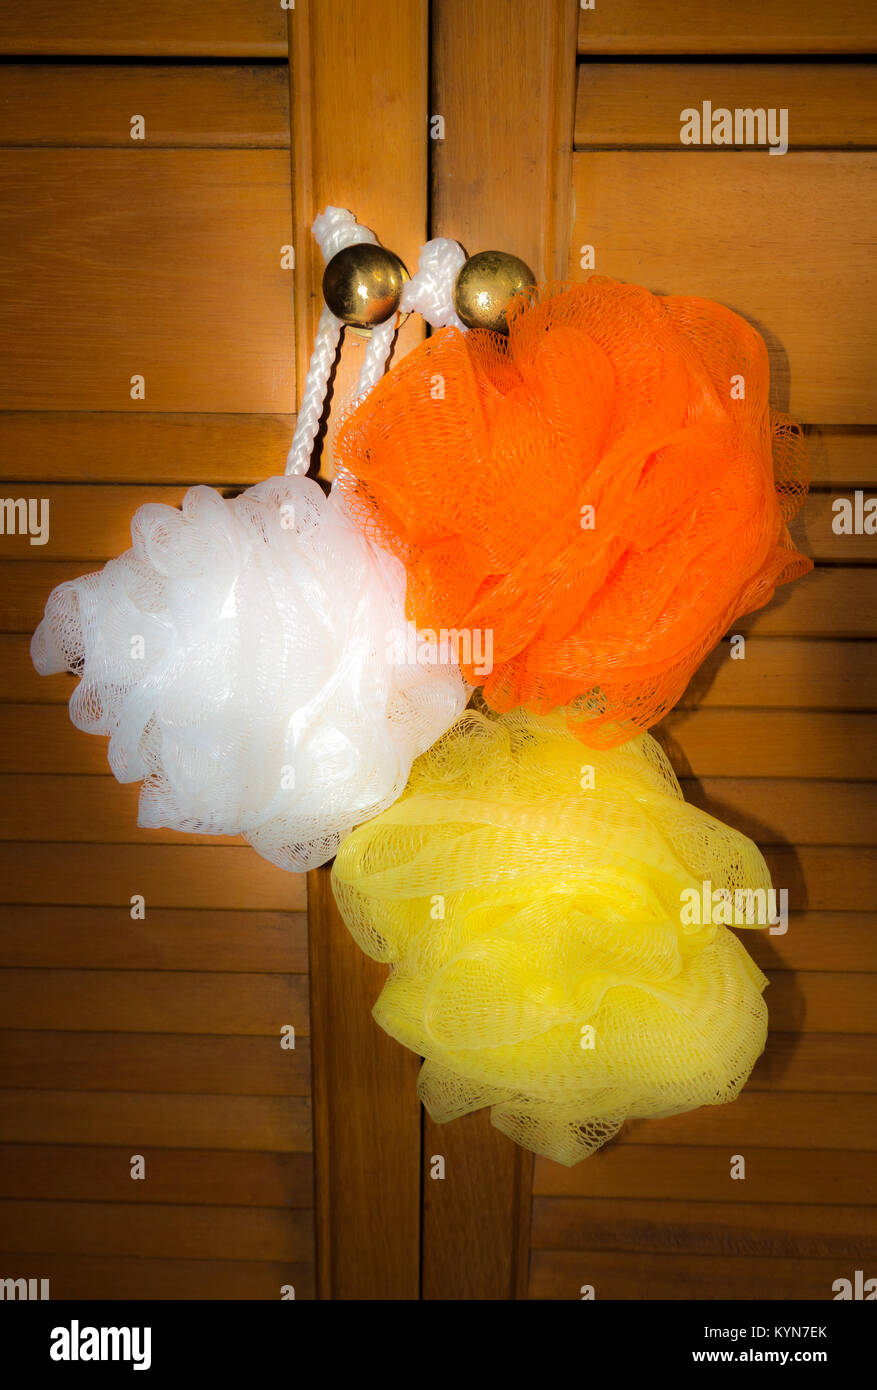 Three white, orange and yellow shower / bath scrunchies (polythene mesh exfoliating sponges), hanging on the knobs of louvred bathroom doors. Stock Photo